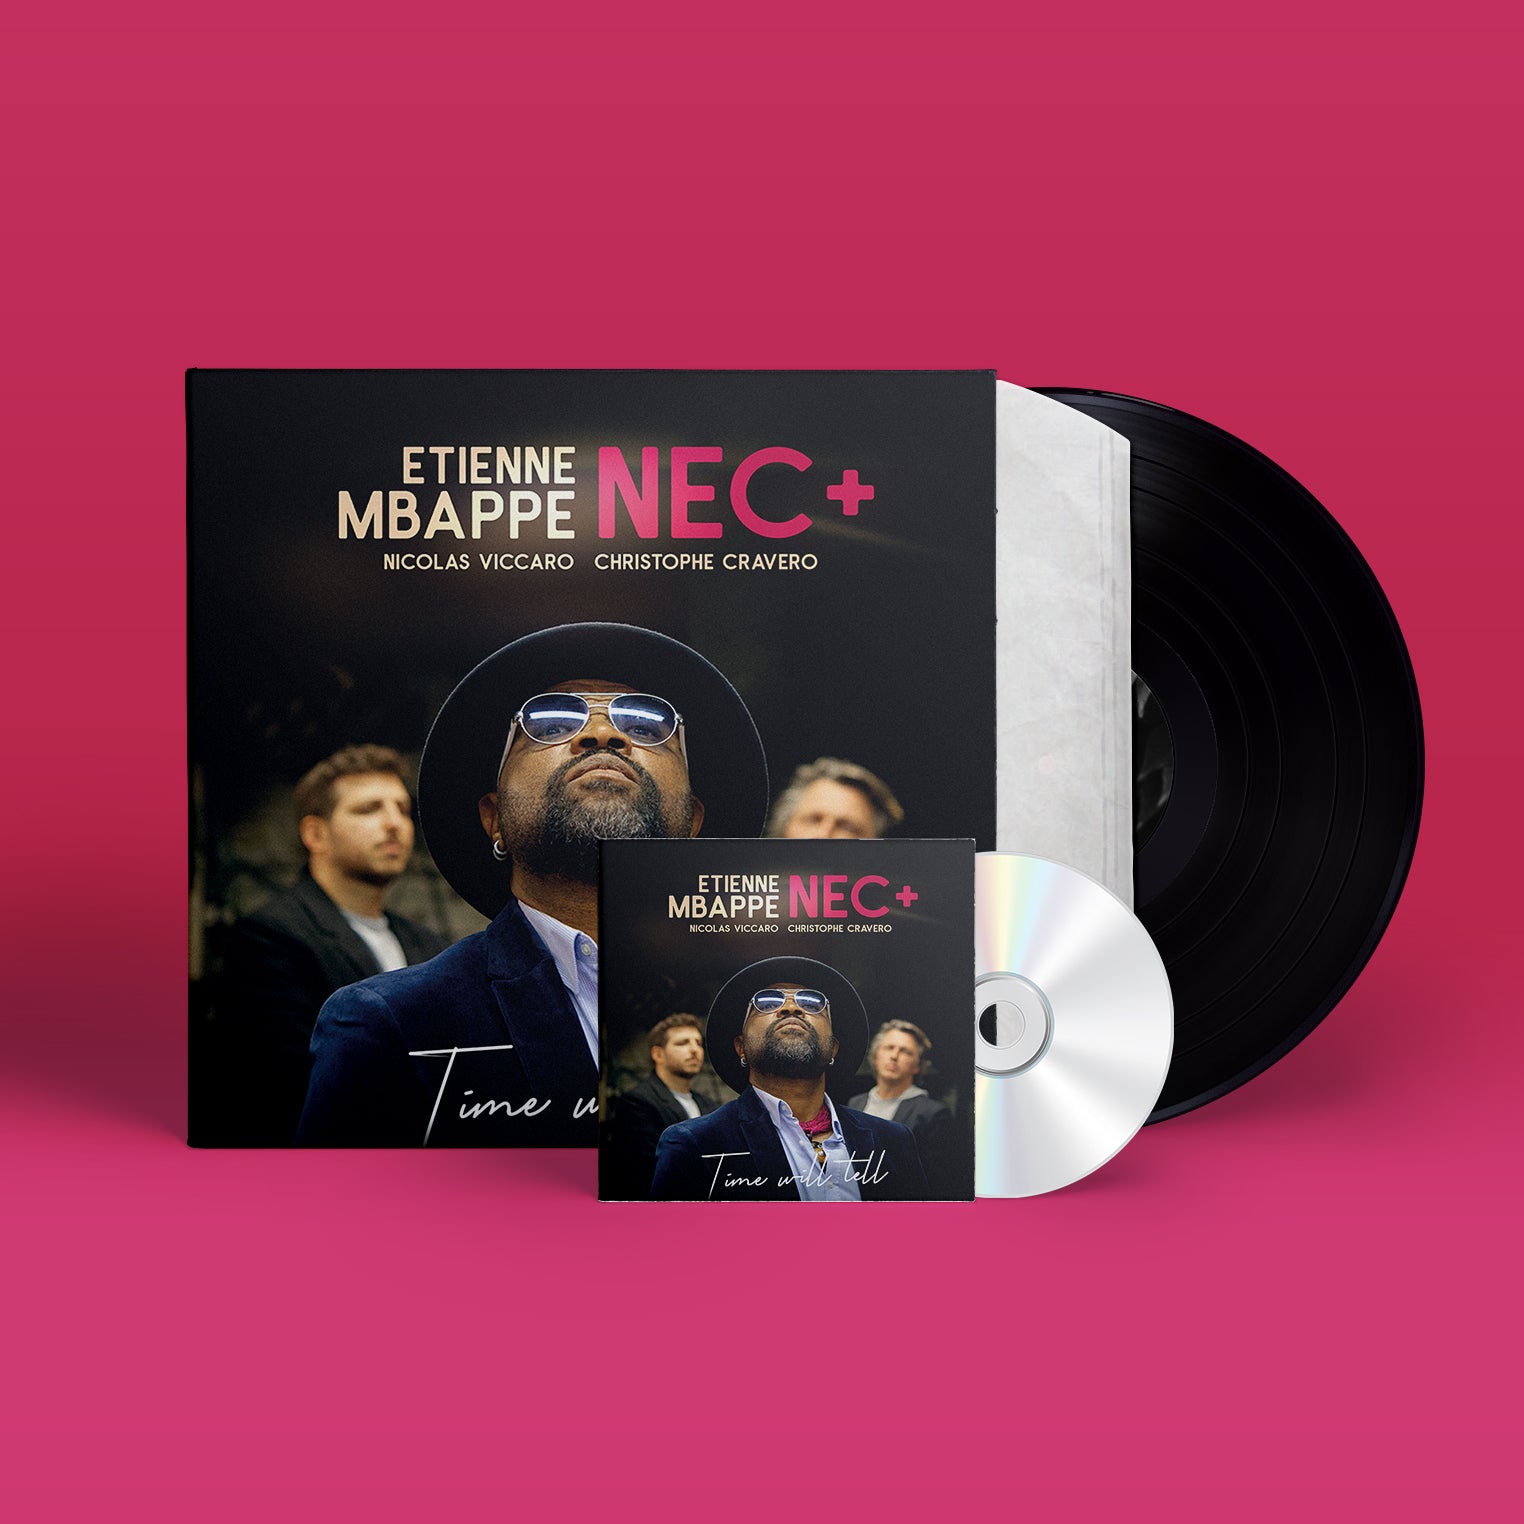 Etienne Mbappe / Nec + - Time will tell